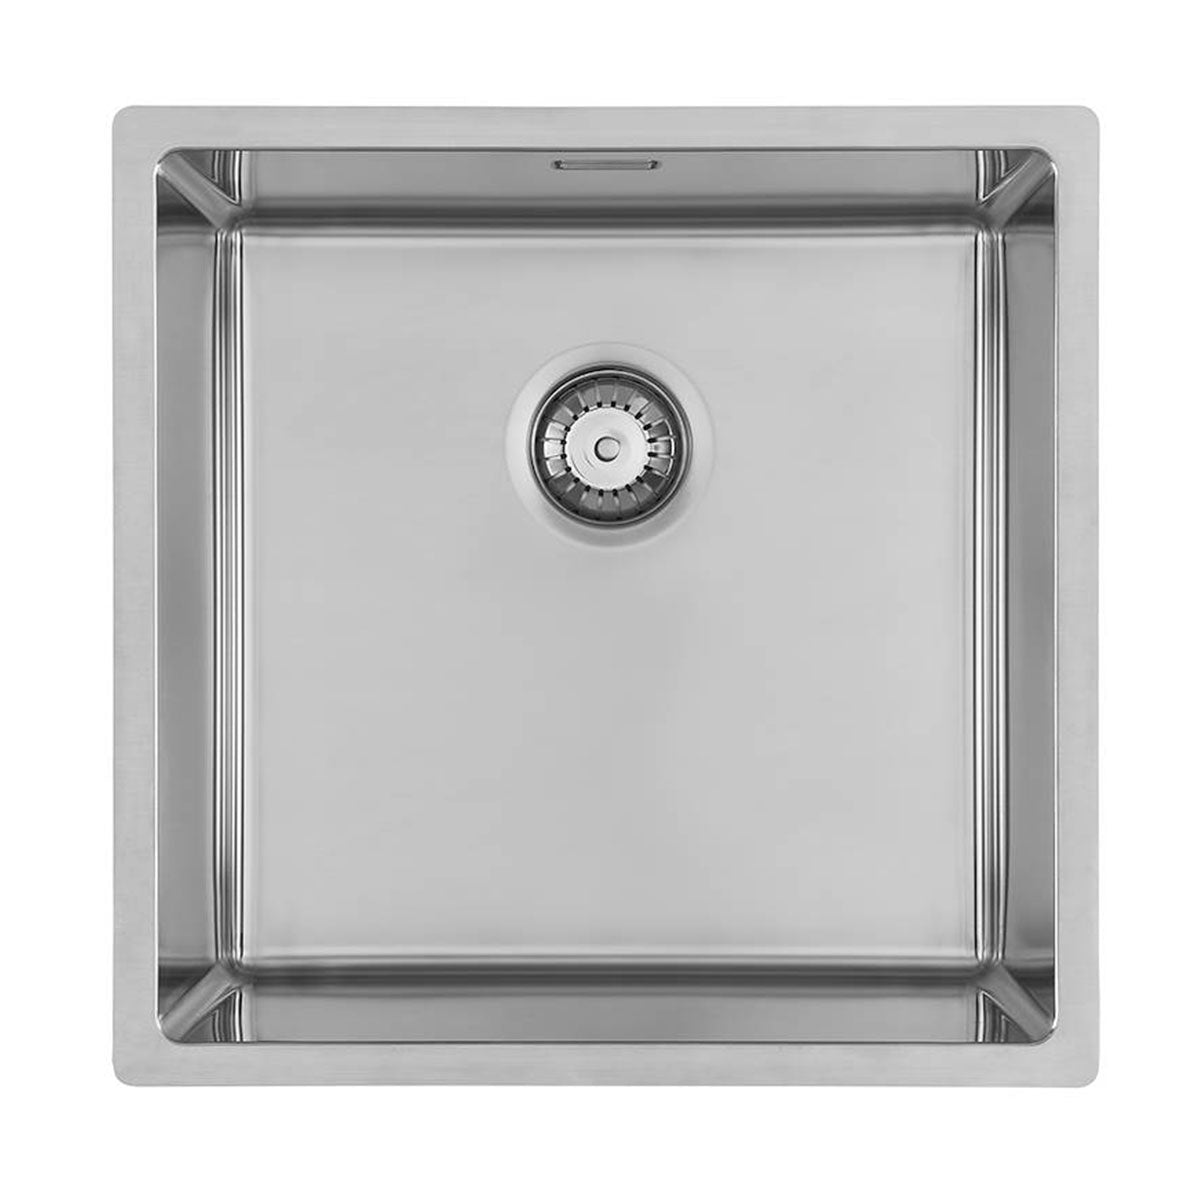 Foster Skin 400 Kitchen Sink - Brushed Stainless Steel 